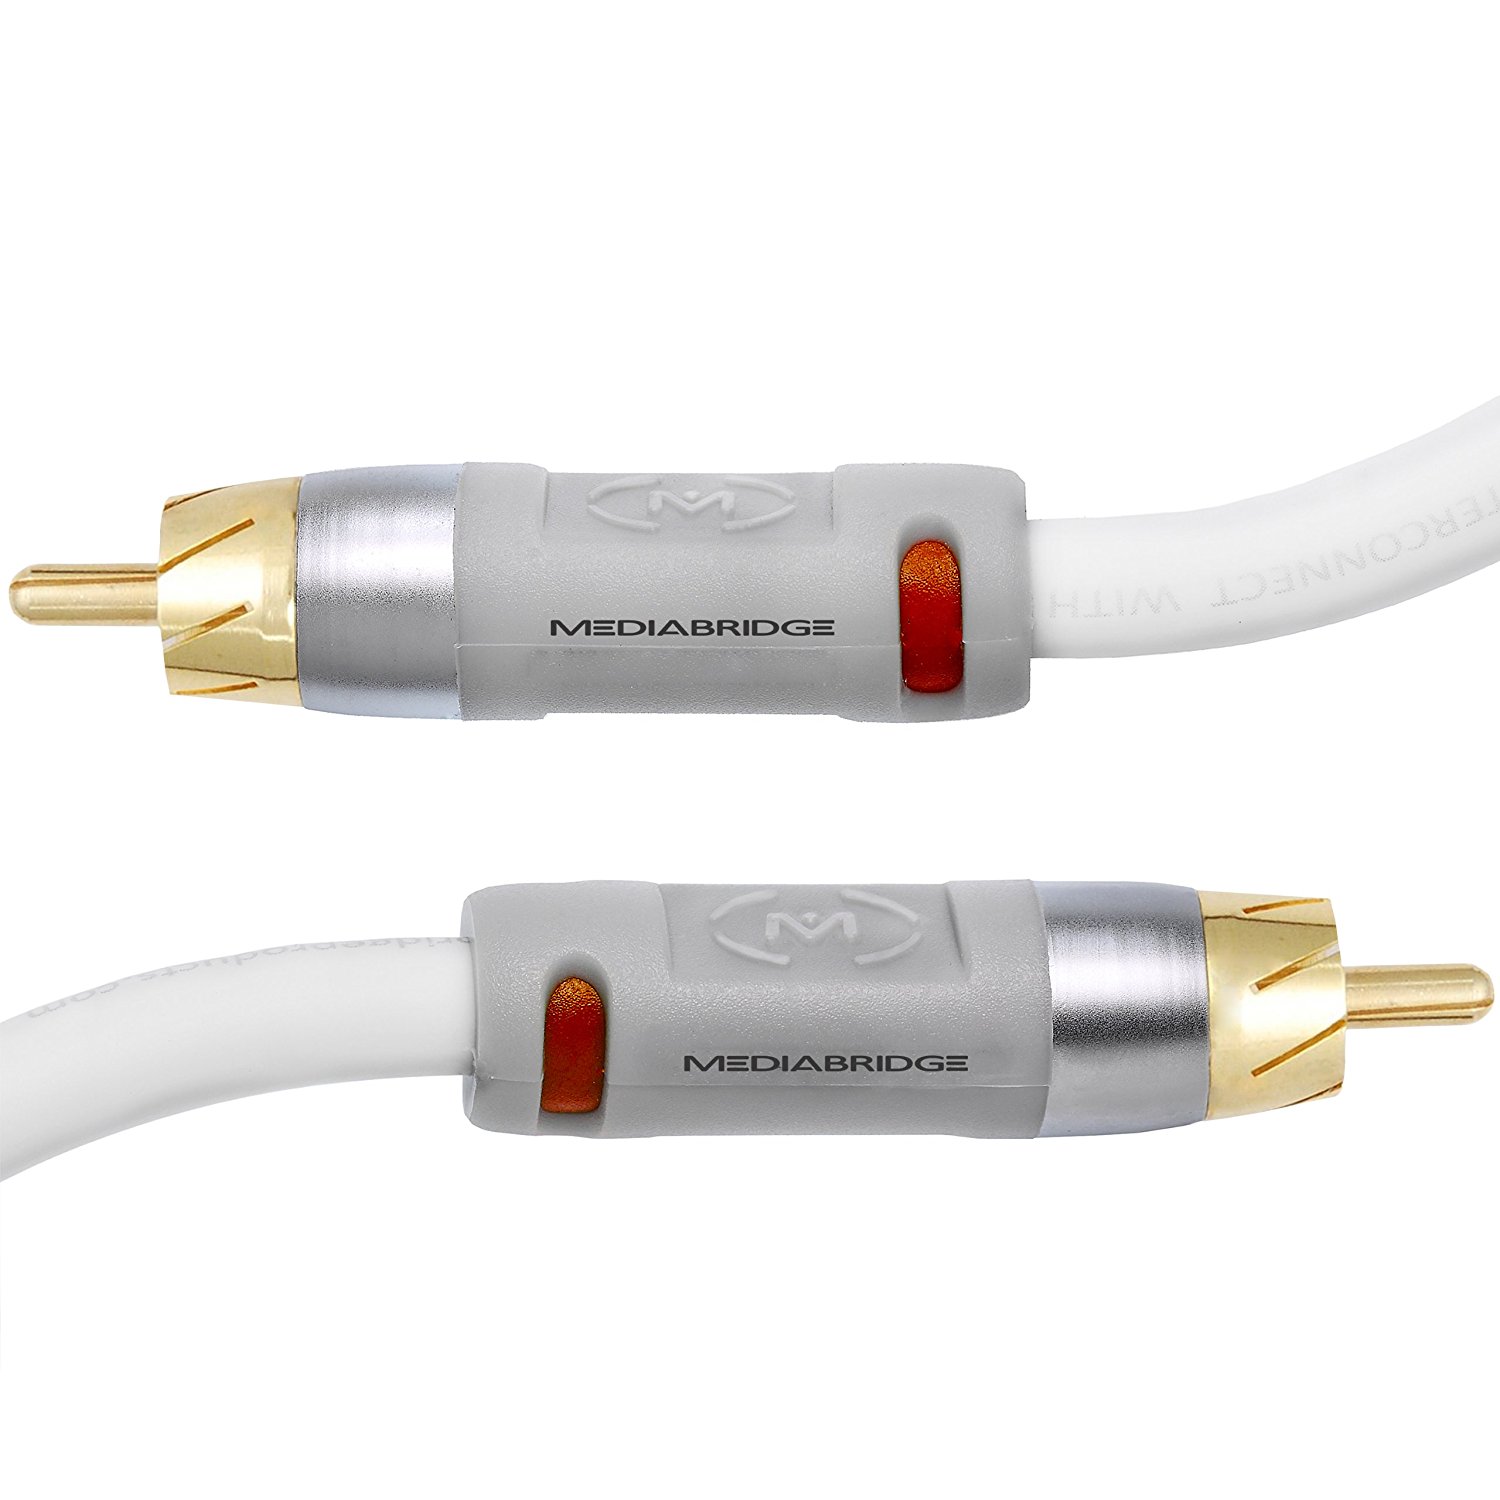 Mediabridge ULTRA Series Digital Audio Coaxial Cable (4 Feet) - Dual Shielded with RCA to RCA Gold-Plated Connectors - White - (Part# CJ04-6WR-G2 ) - image 2 of 4